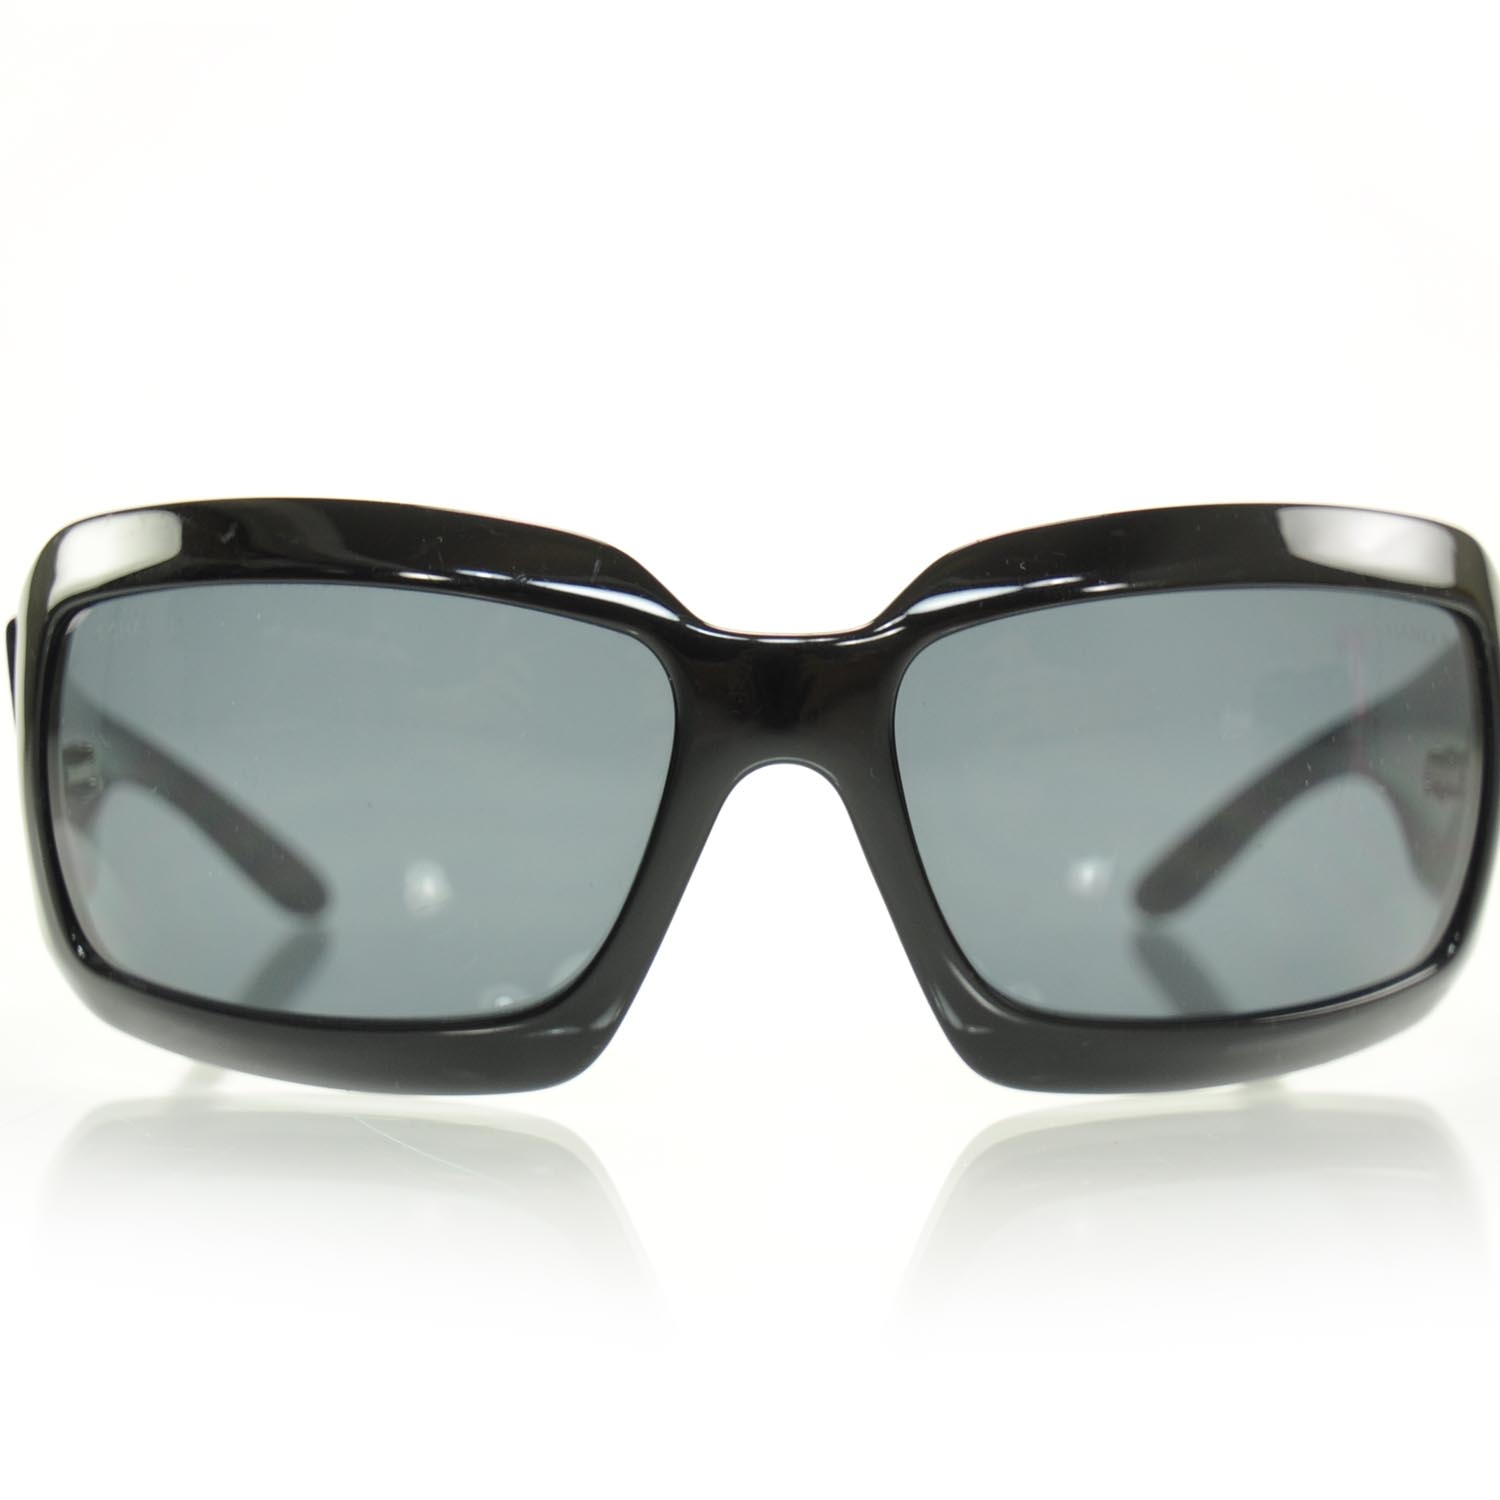 CHANEL Mother of Pearl Sunglasses 5076 H Black 25786